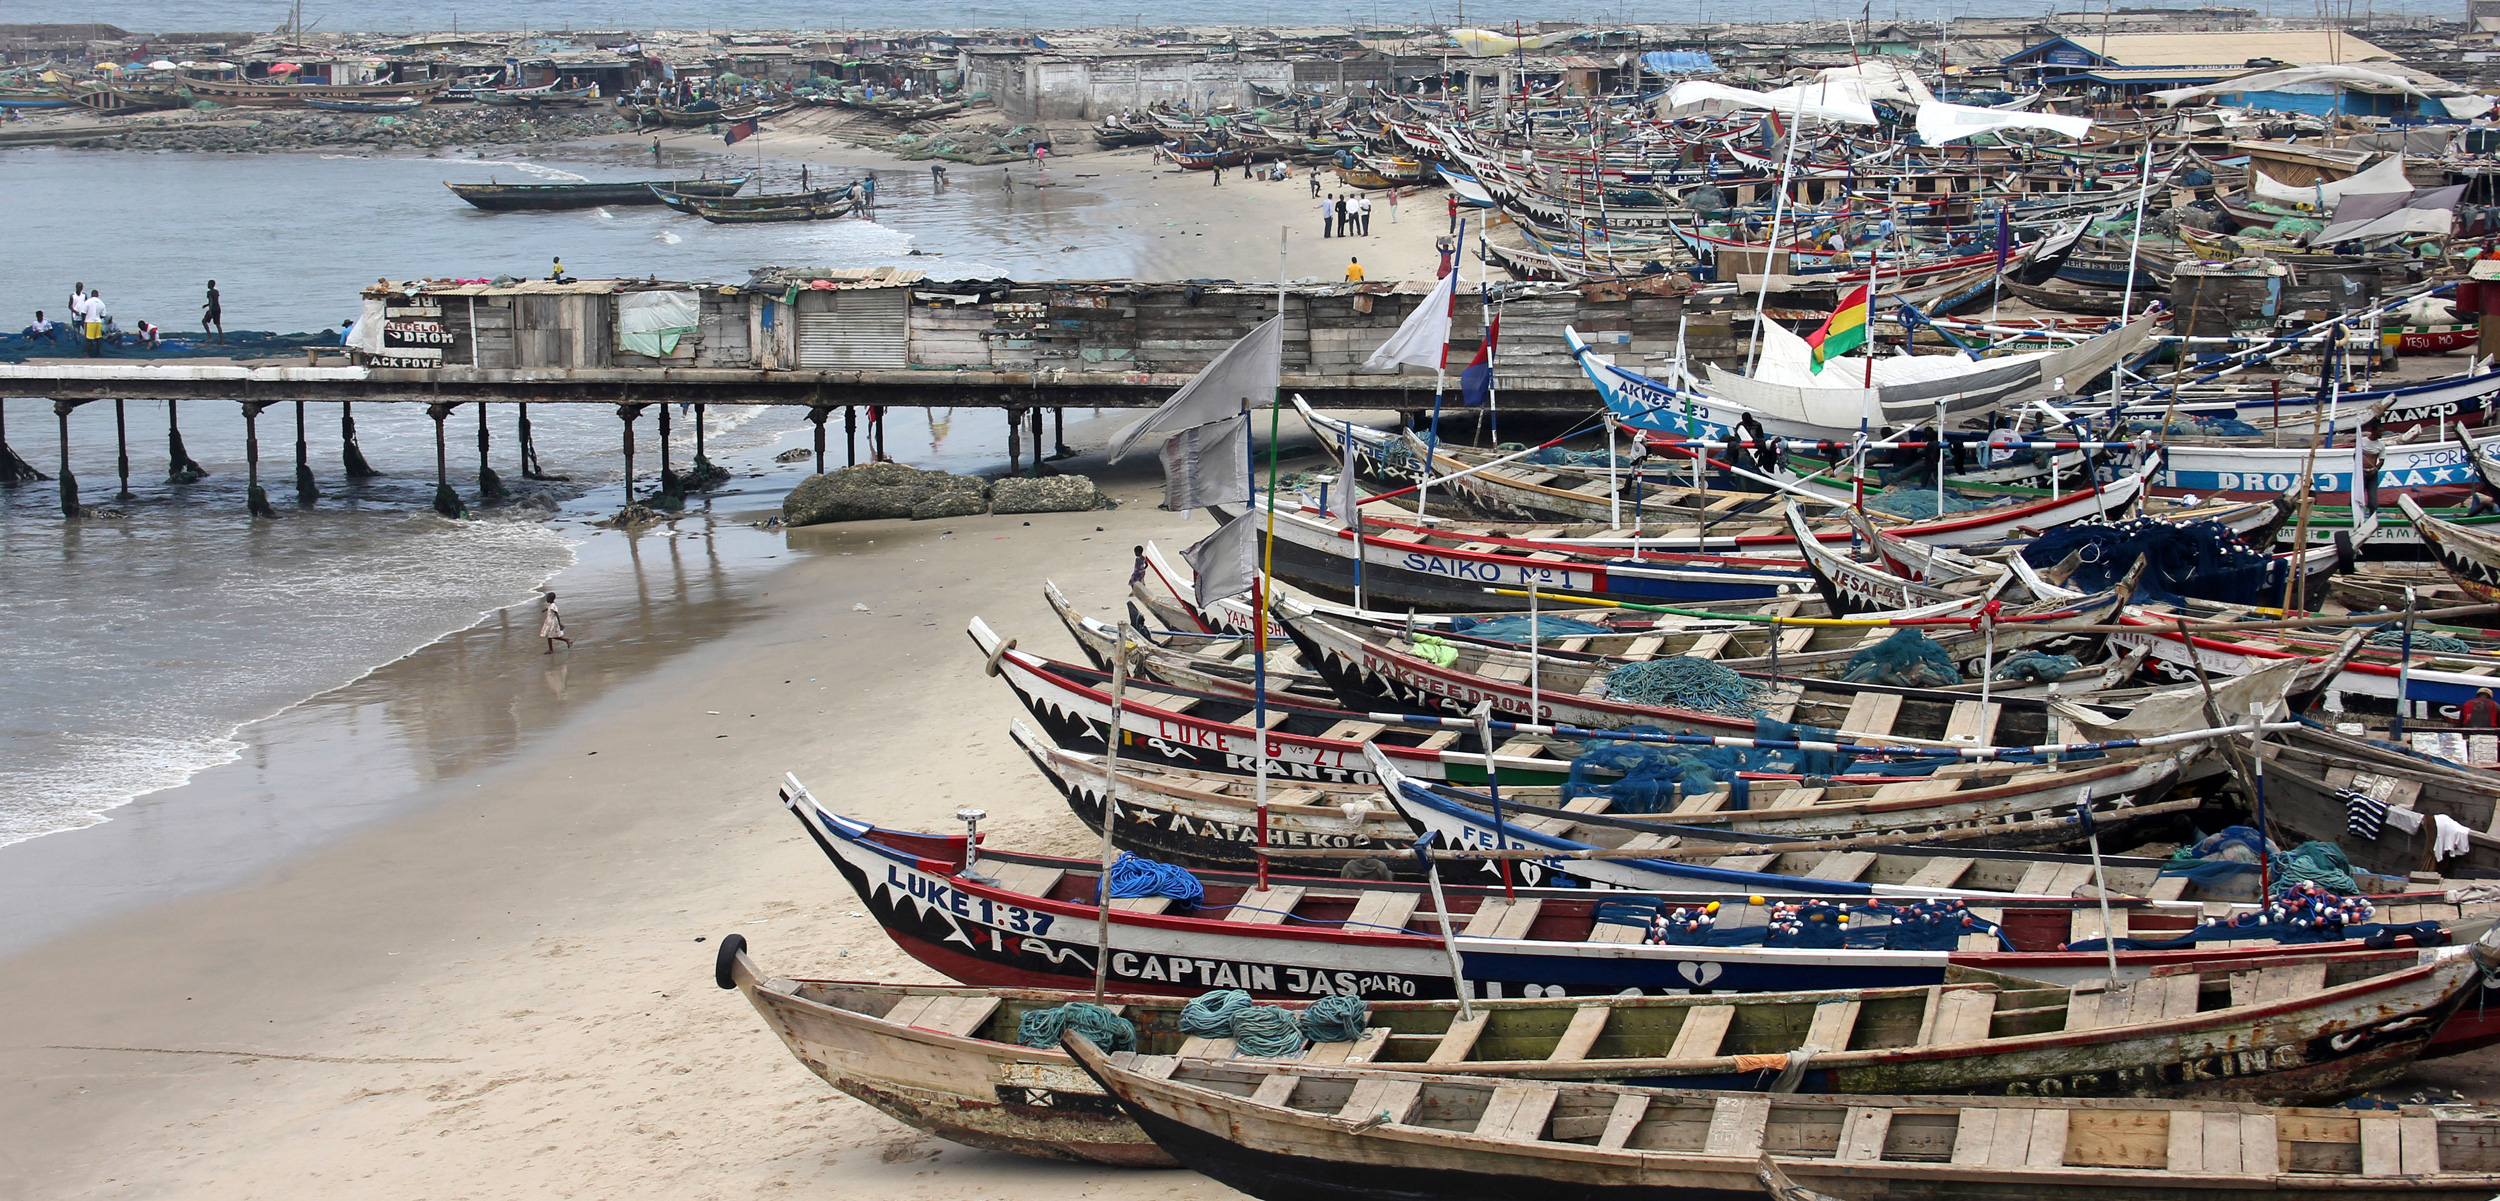 In West Africa, millions of fishers—both industrial and artisanal—are competing for a slice of the catch. Photo by Sabena Jane Blackbird/Alamy Stock Photo